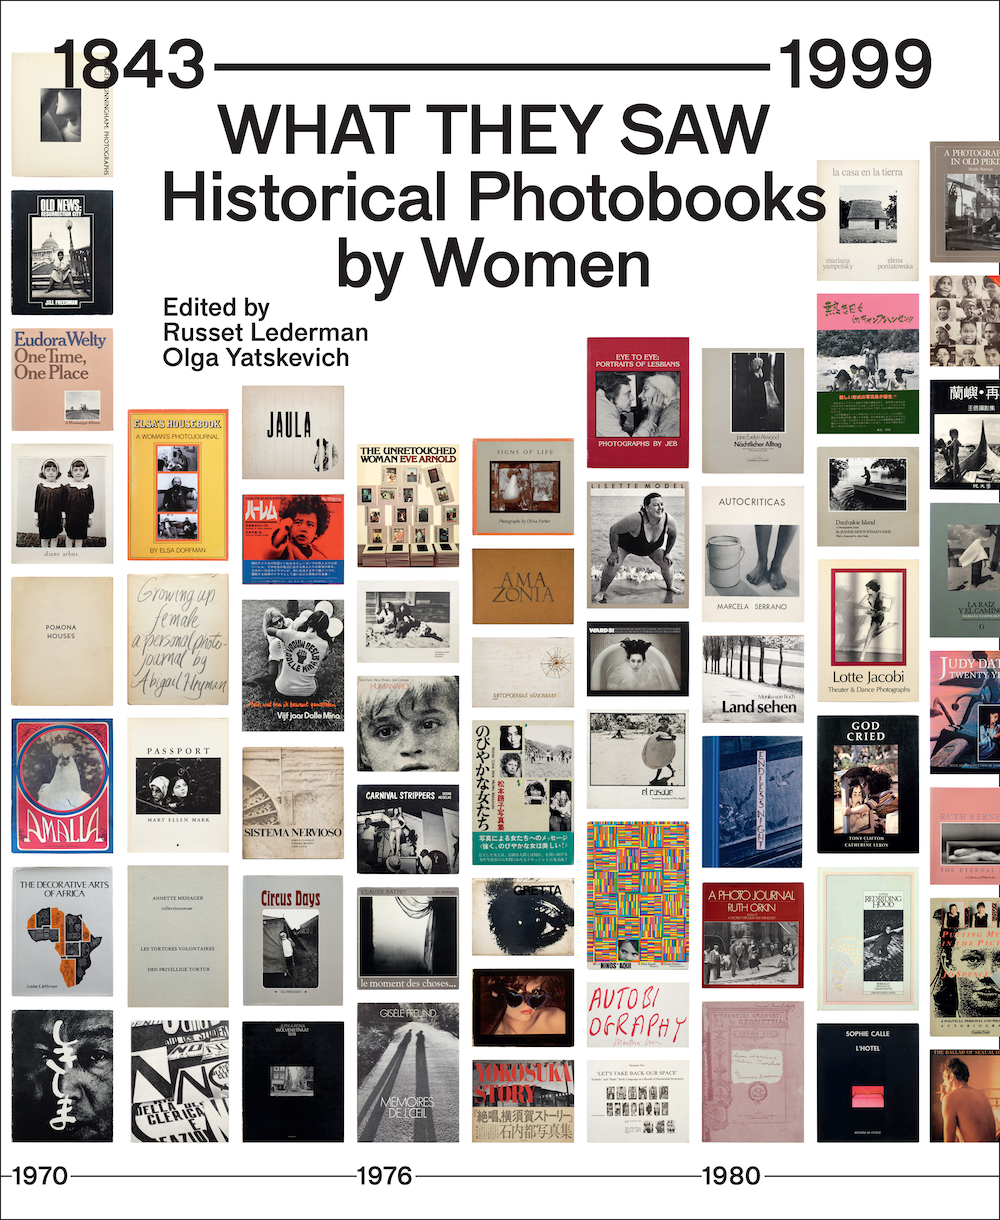 The cover of What They Saw - Historical Photobooks by Women, 1843-1999 - winner of the 2022 Kraszna-Krausz Photography Book Award